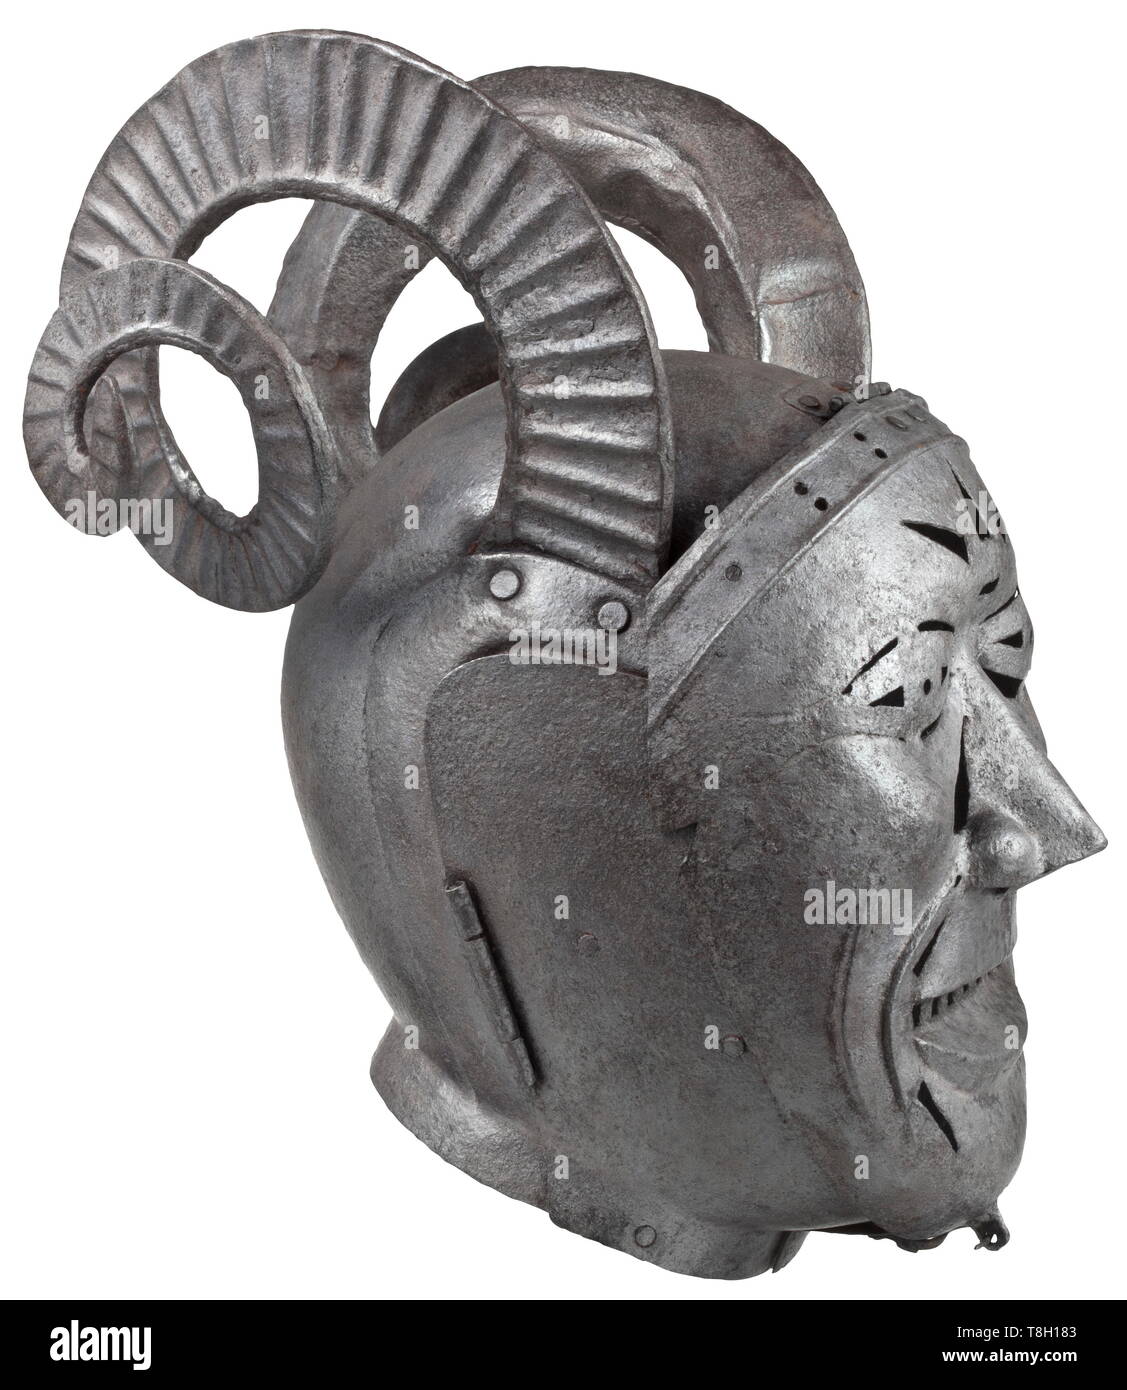 A mask of shame, or brank - collector's reproduction in the style of the 16th century Two-piece iron skull with riveted, spiral-shaped ram's horns. Laterally hinged two-piece bevor. Hinged, geometrically pierced visor in the shape of a face. Somewhat corroded with dark patina. Height ca. 40 cm. This piece was modelled on an armet housed in the Royal Armouries in Leeds today. The famous 'horned helmet' was made between 1511 and 1514 by the Innsbruck armourer Konrad Seusenhofer and was a present from Emperor Maximilian I to the English King Henry V, Additional-Rights-Clearance-Info-Not-Available Stock Photo